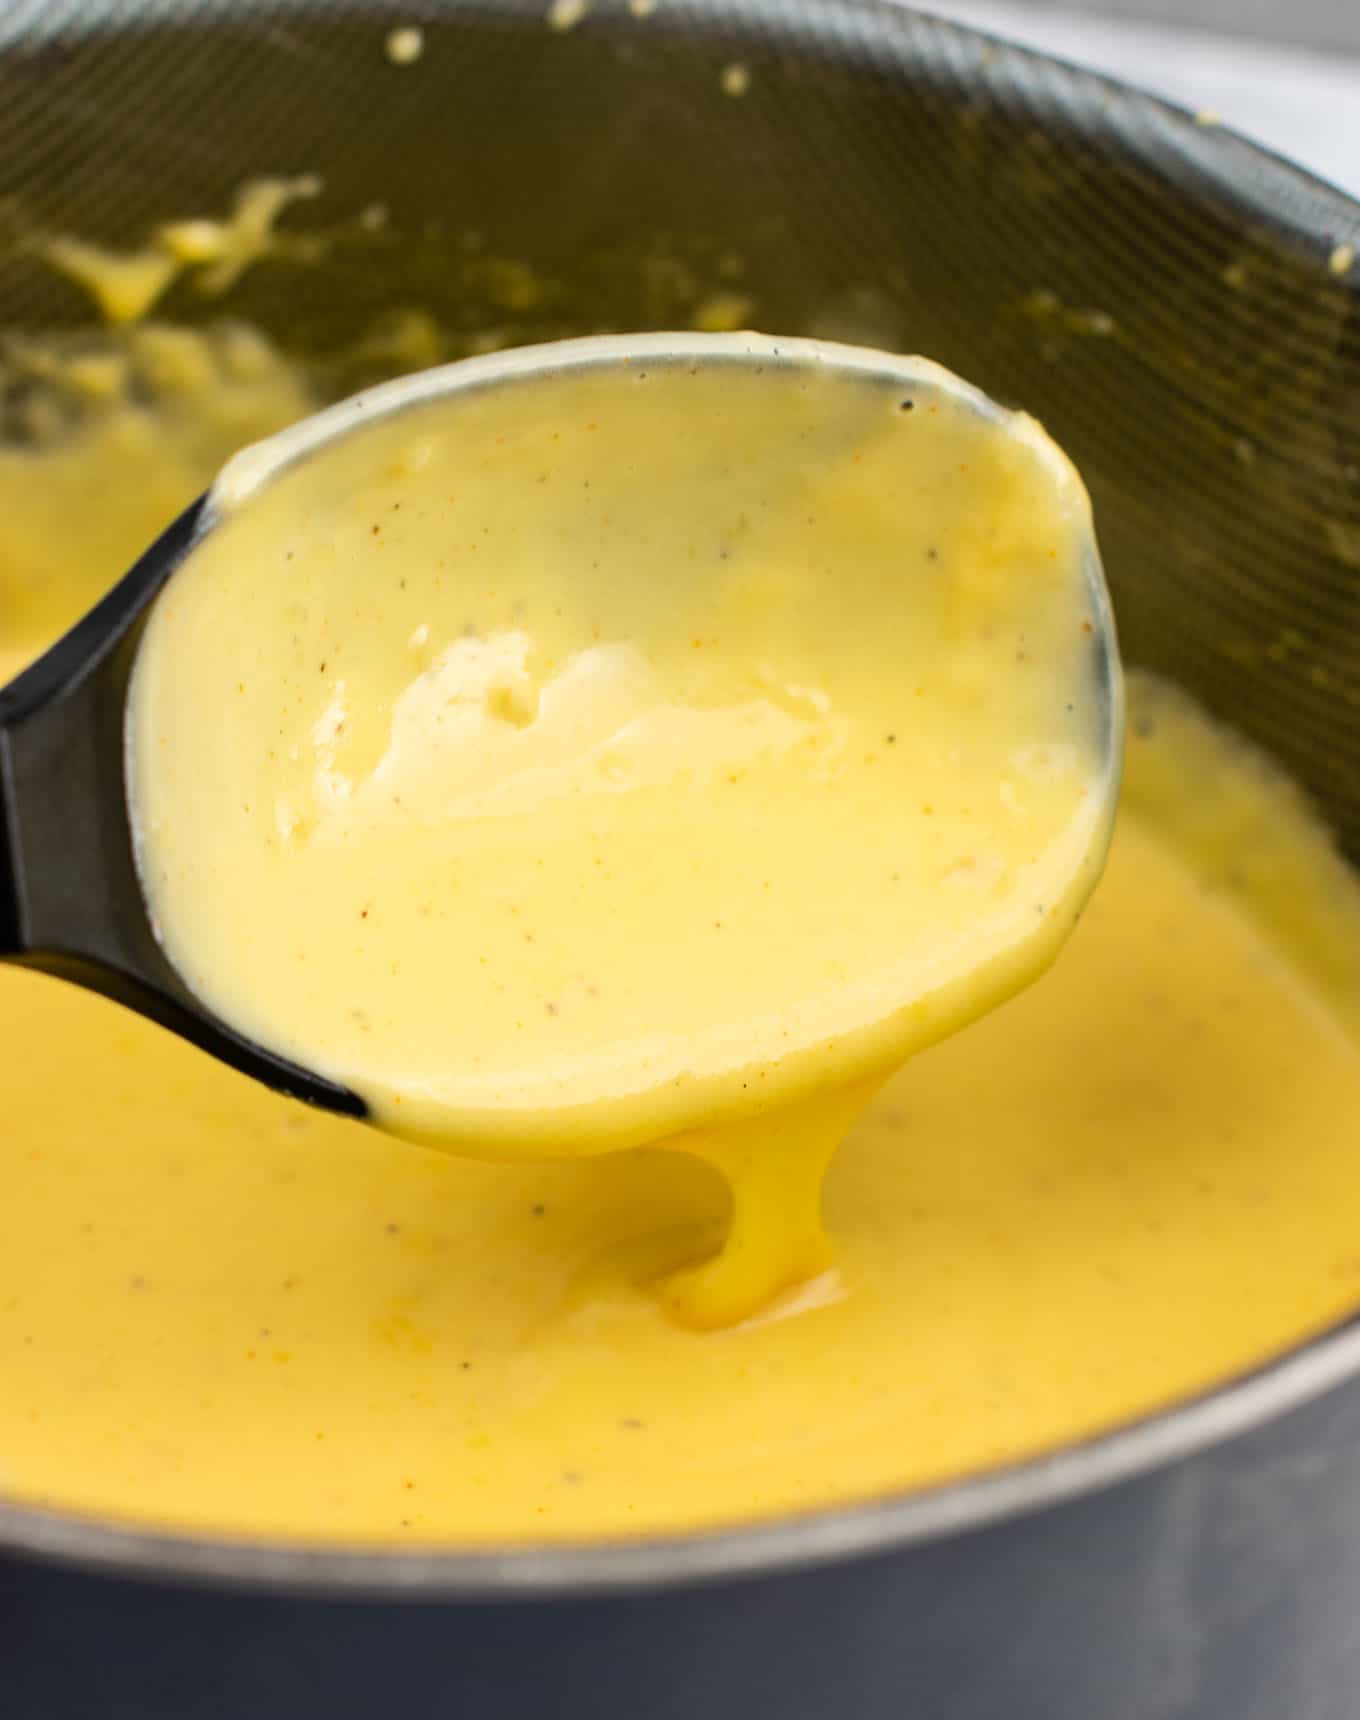 a spoon dripping with cheese sauce over a sauce pan